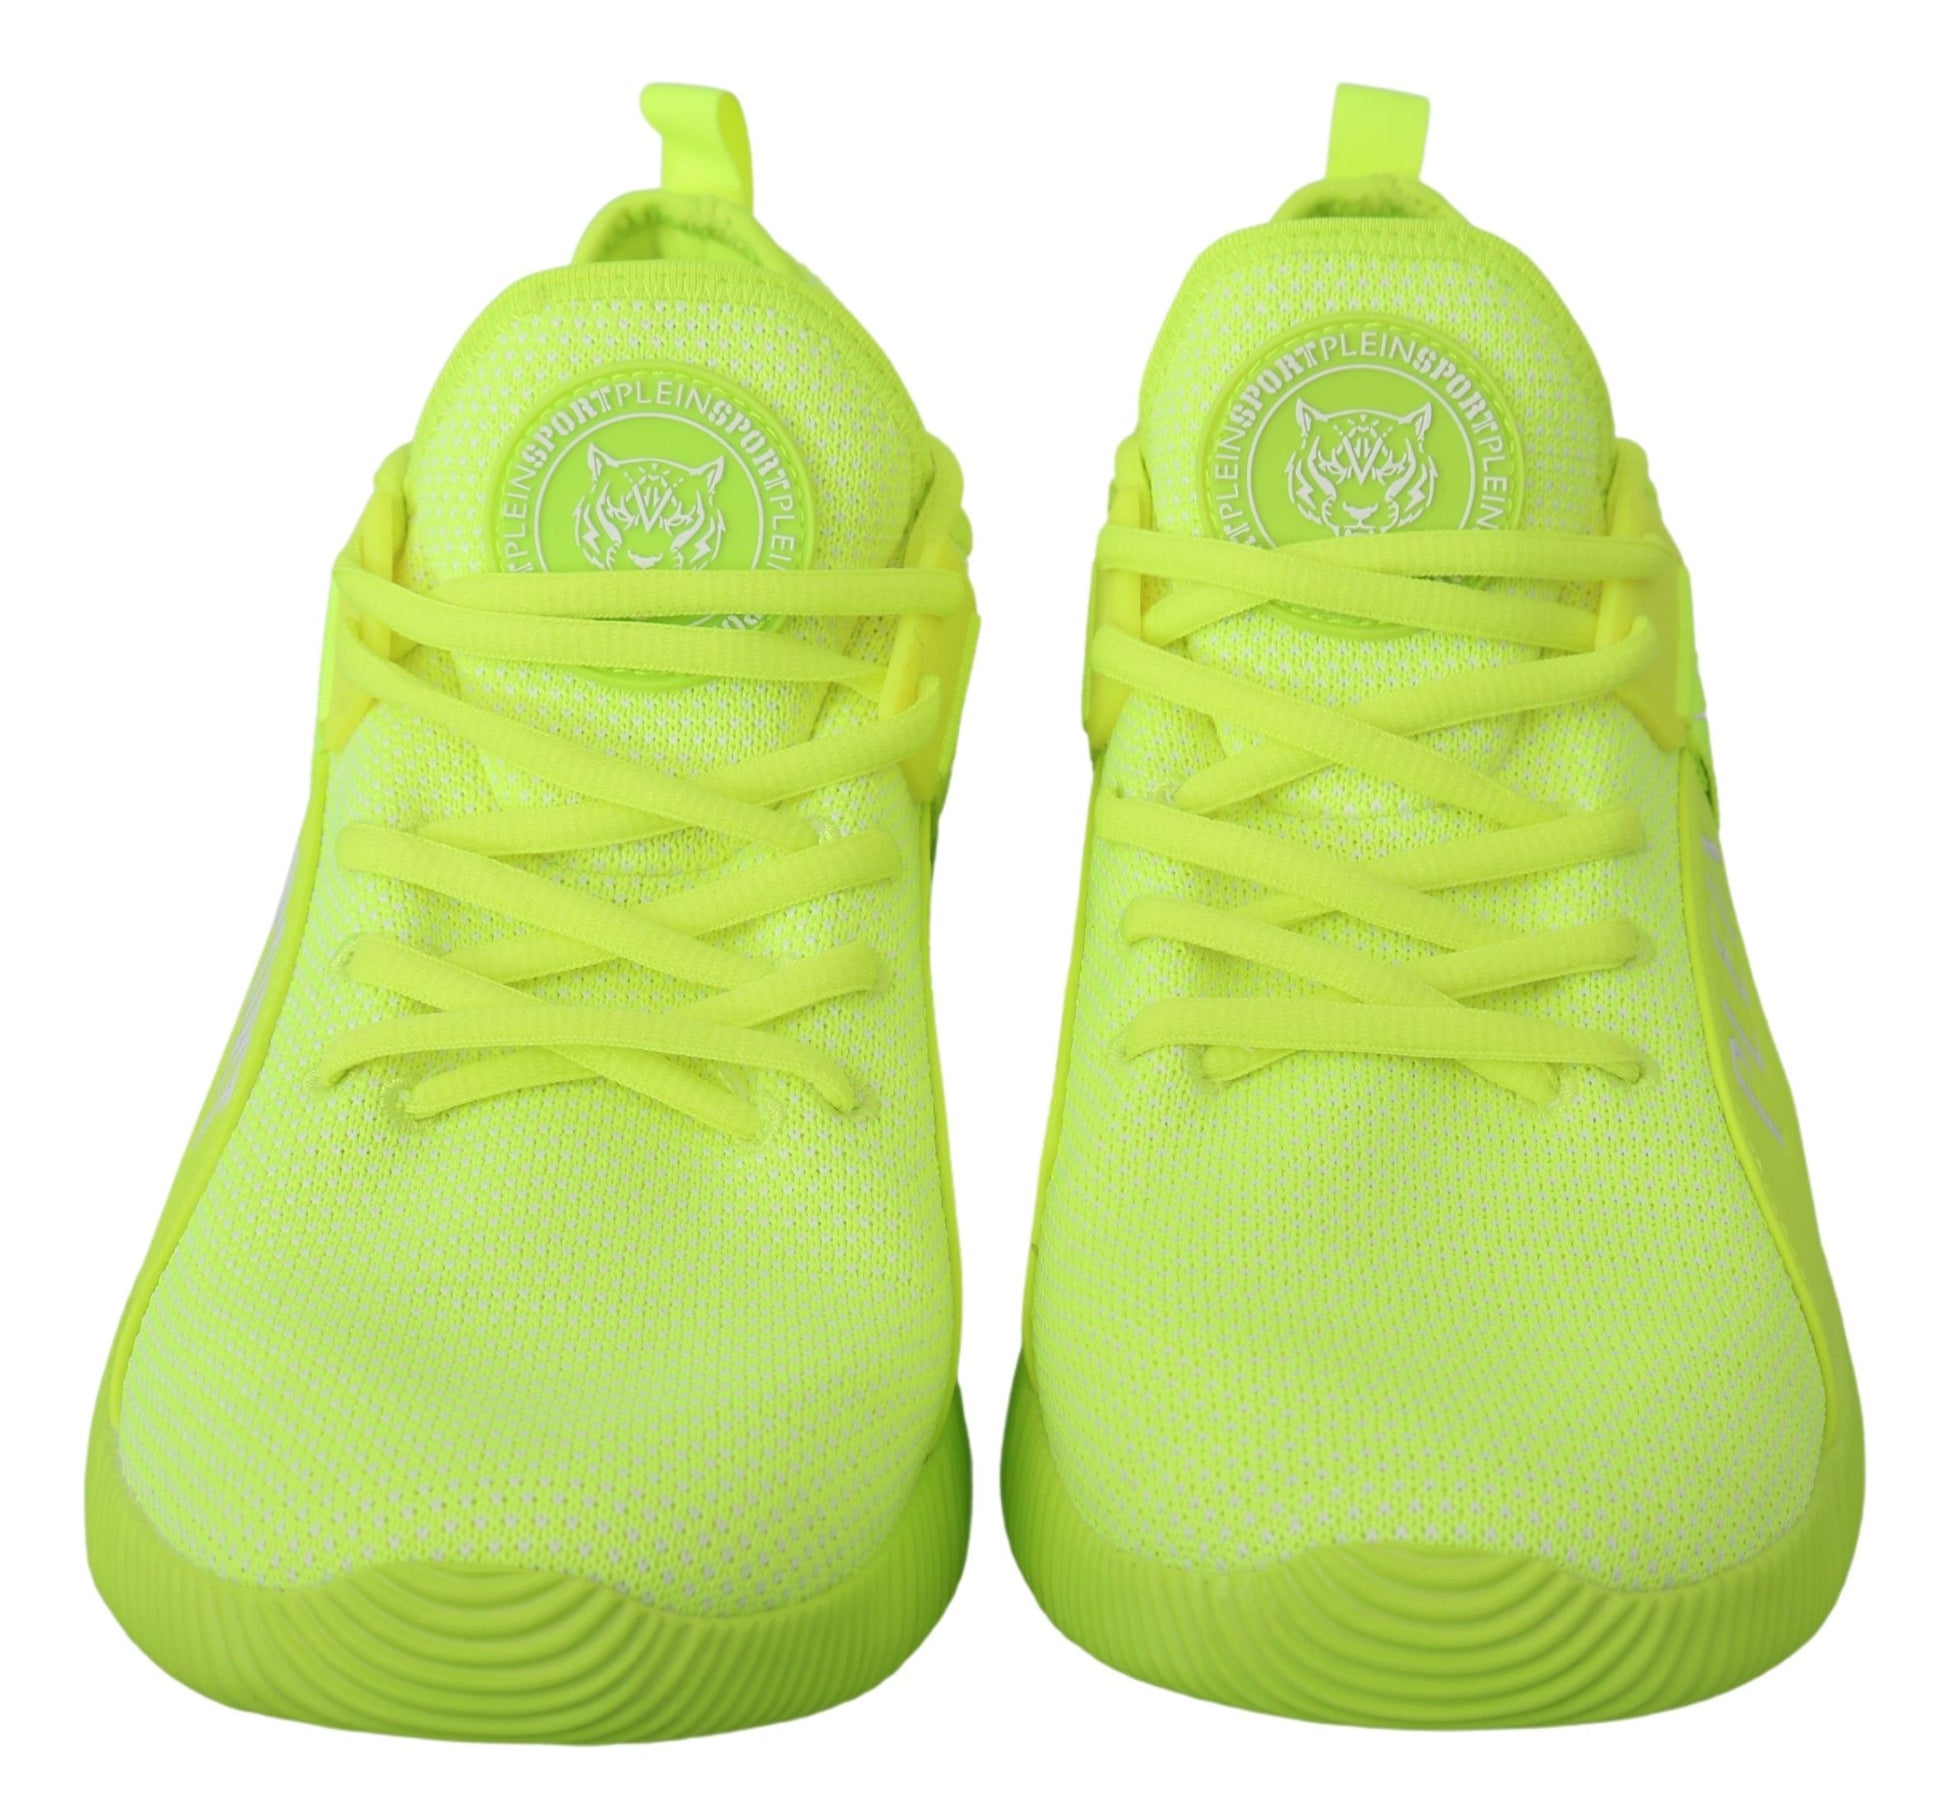 Green CARTER Logo Hi-Top Sneakers Shoes - Designed by Philipp Plein Available to Buy at a Discounted Price on Moon Behind The Hill Online Designer Discount Store